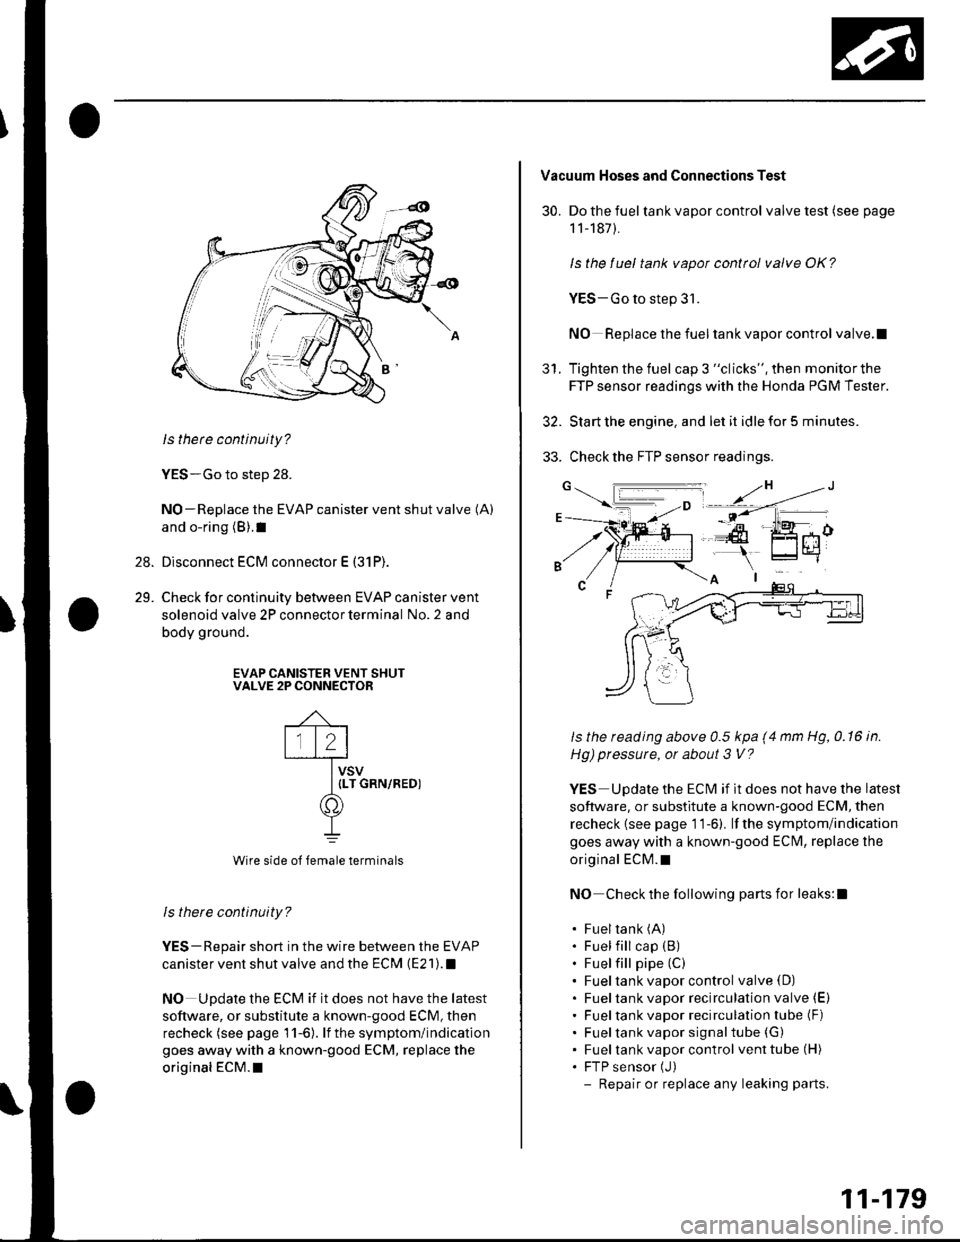 HONDA CIVIC 2003 7.G Workshop Manual 28.
29.
ls thete continuity?
YES-Go to step 28.
NO-Replace the EVAP canister vent shut valve (A)
and o-ring (B).1
Disconnect ECM connector E (31P).
Check for continuity between EVAP canister vent
sole